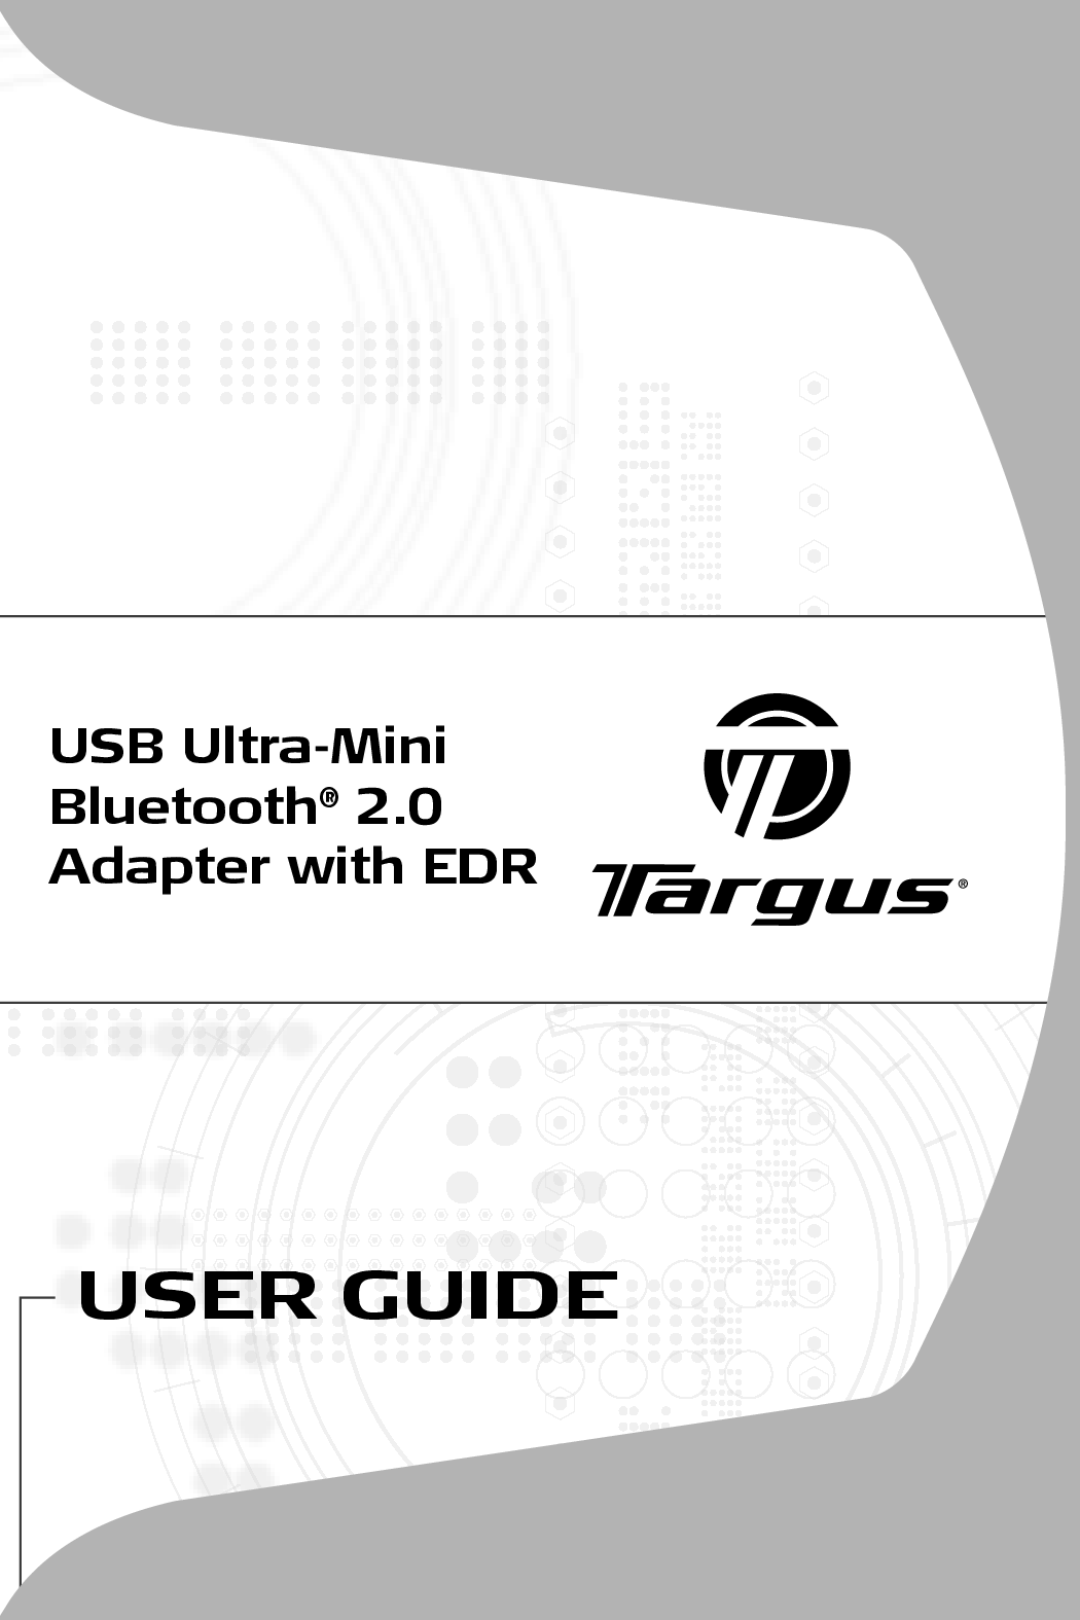 Targus Mini Bluetooth 2.0 Adapter with DER specifications User Guide, USB Ultra-Mini Bluetooth 2.0 Adapter with EDR 